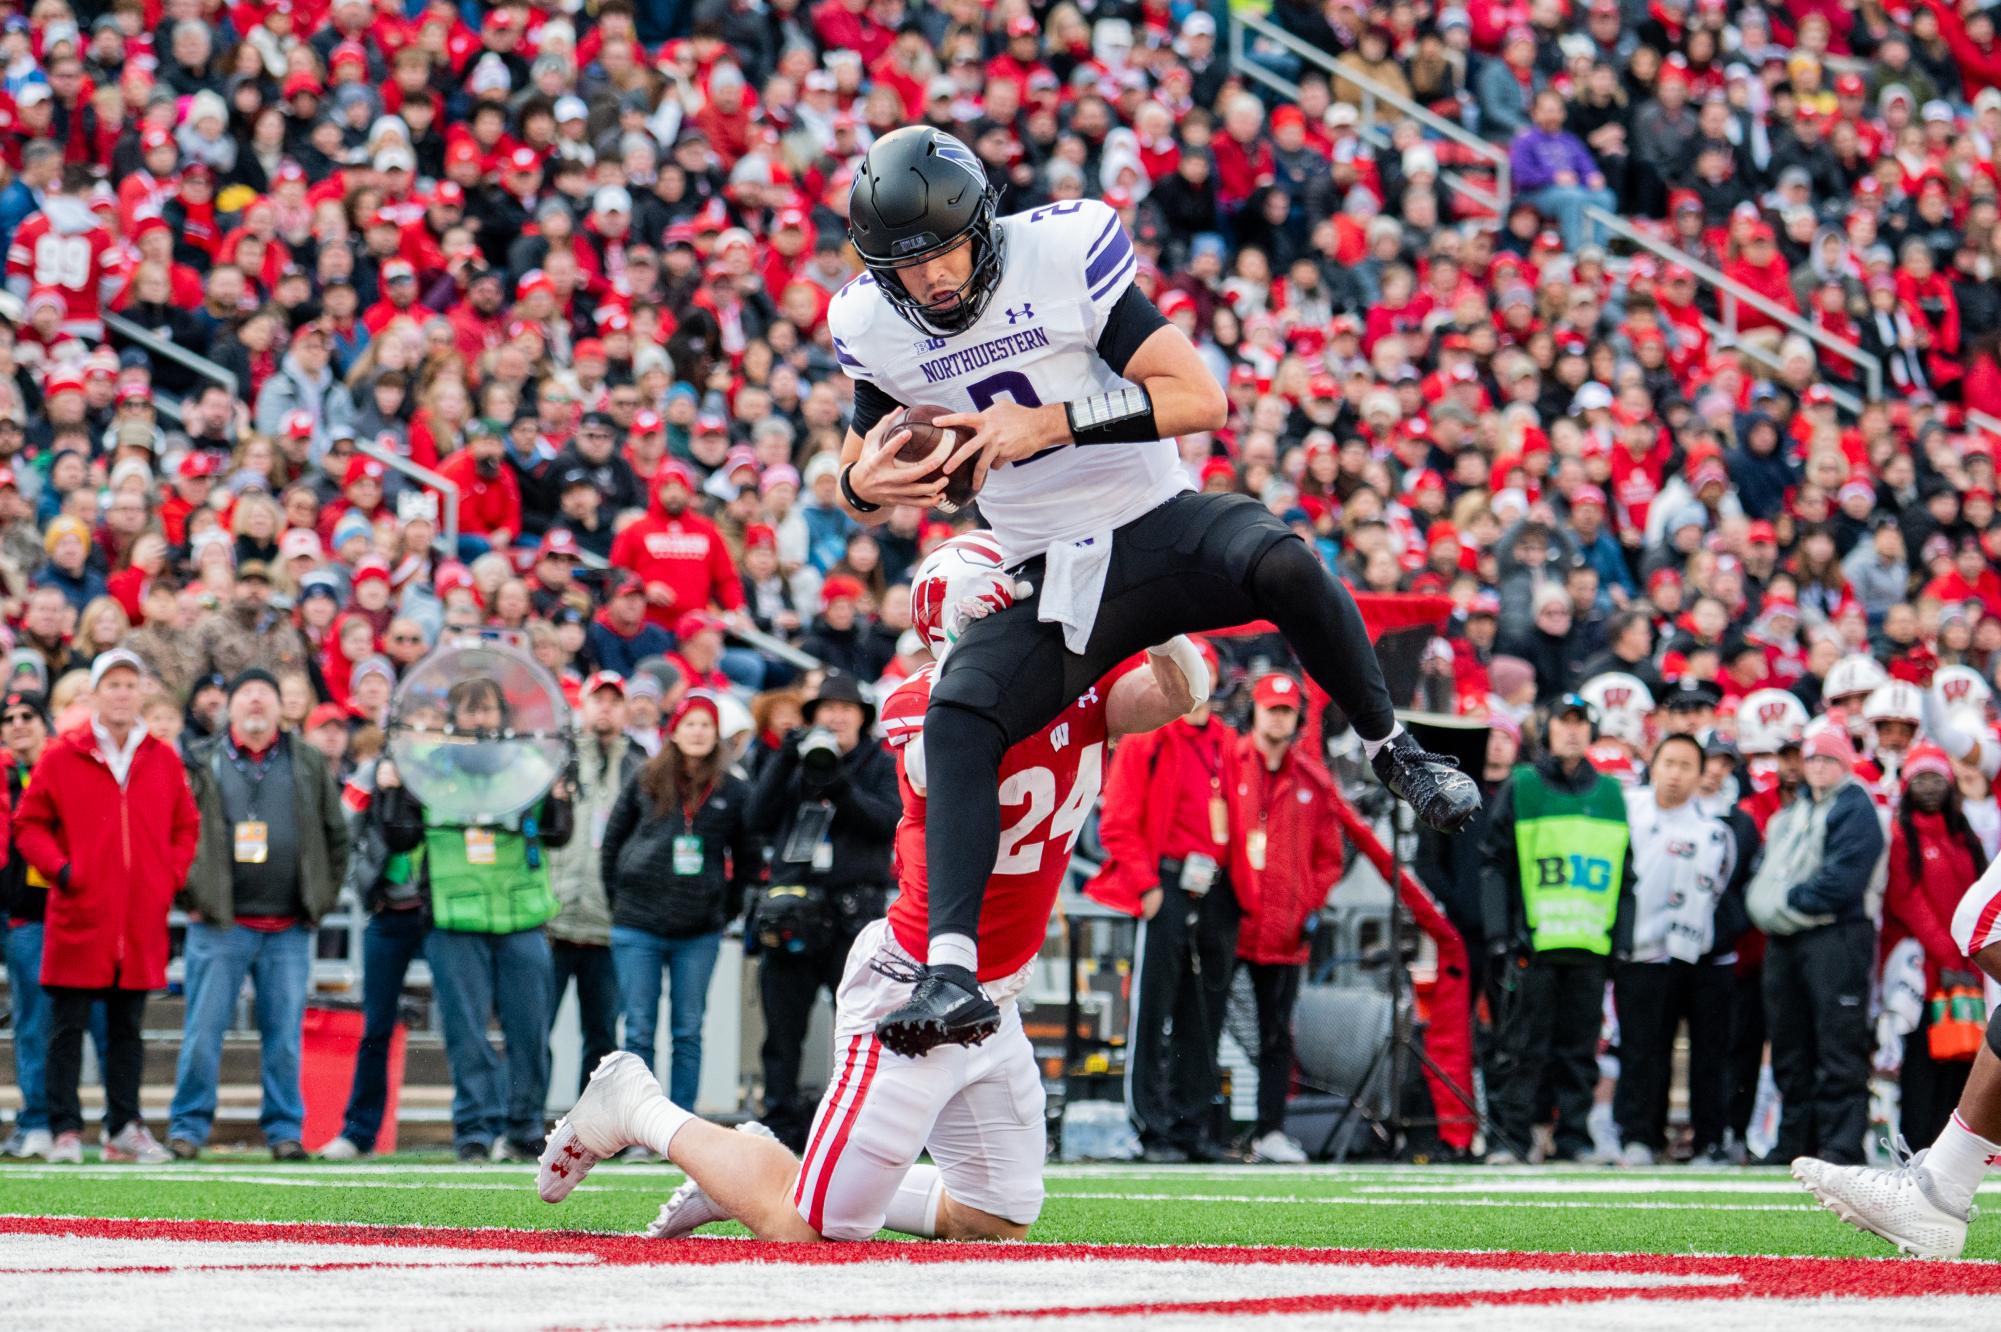 Captured: Northwestern stuns the crowd with decisive 24-10 away victory